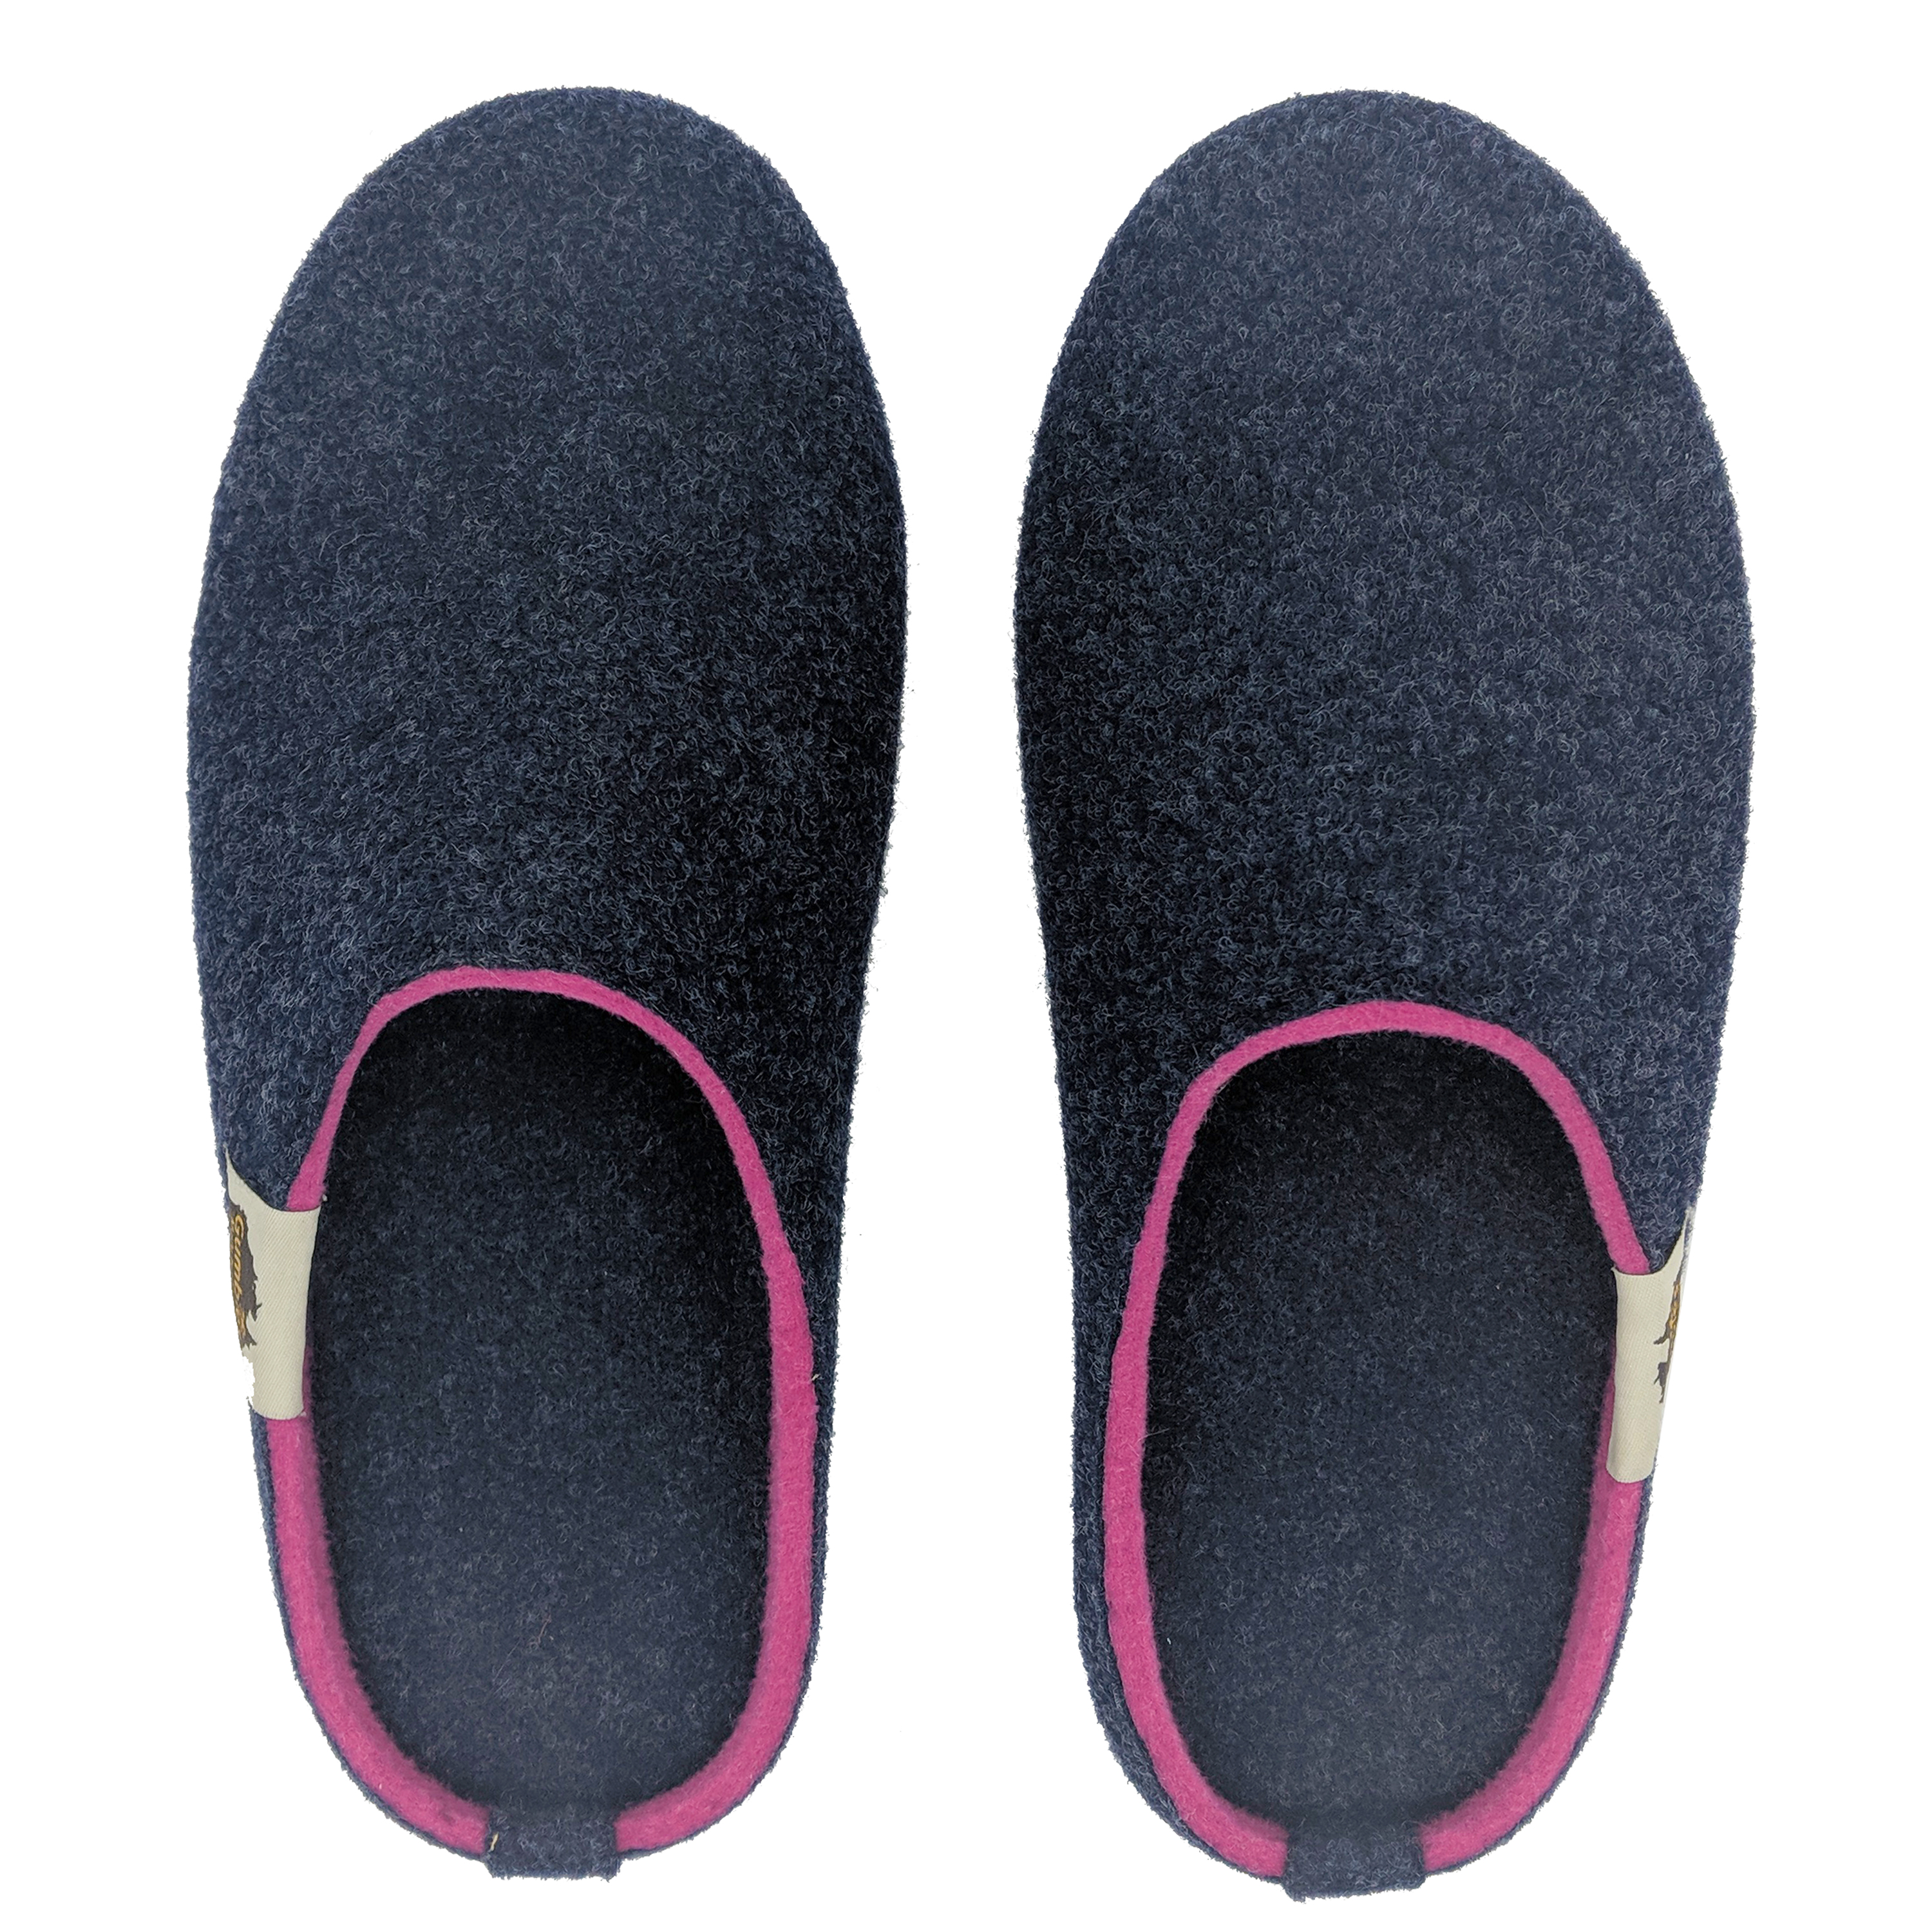 GUMBIES - Outback Slipper, NAVY-PINK